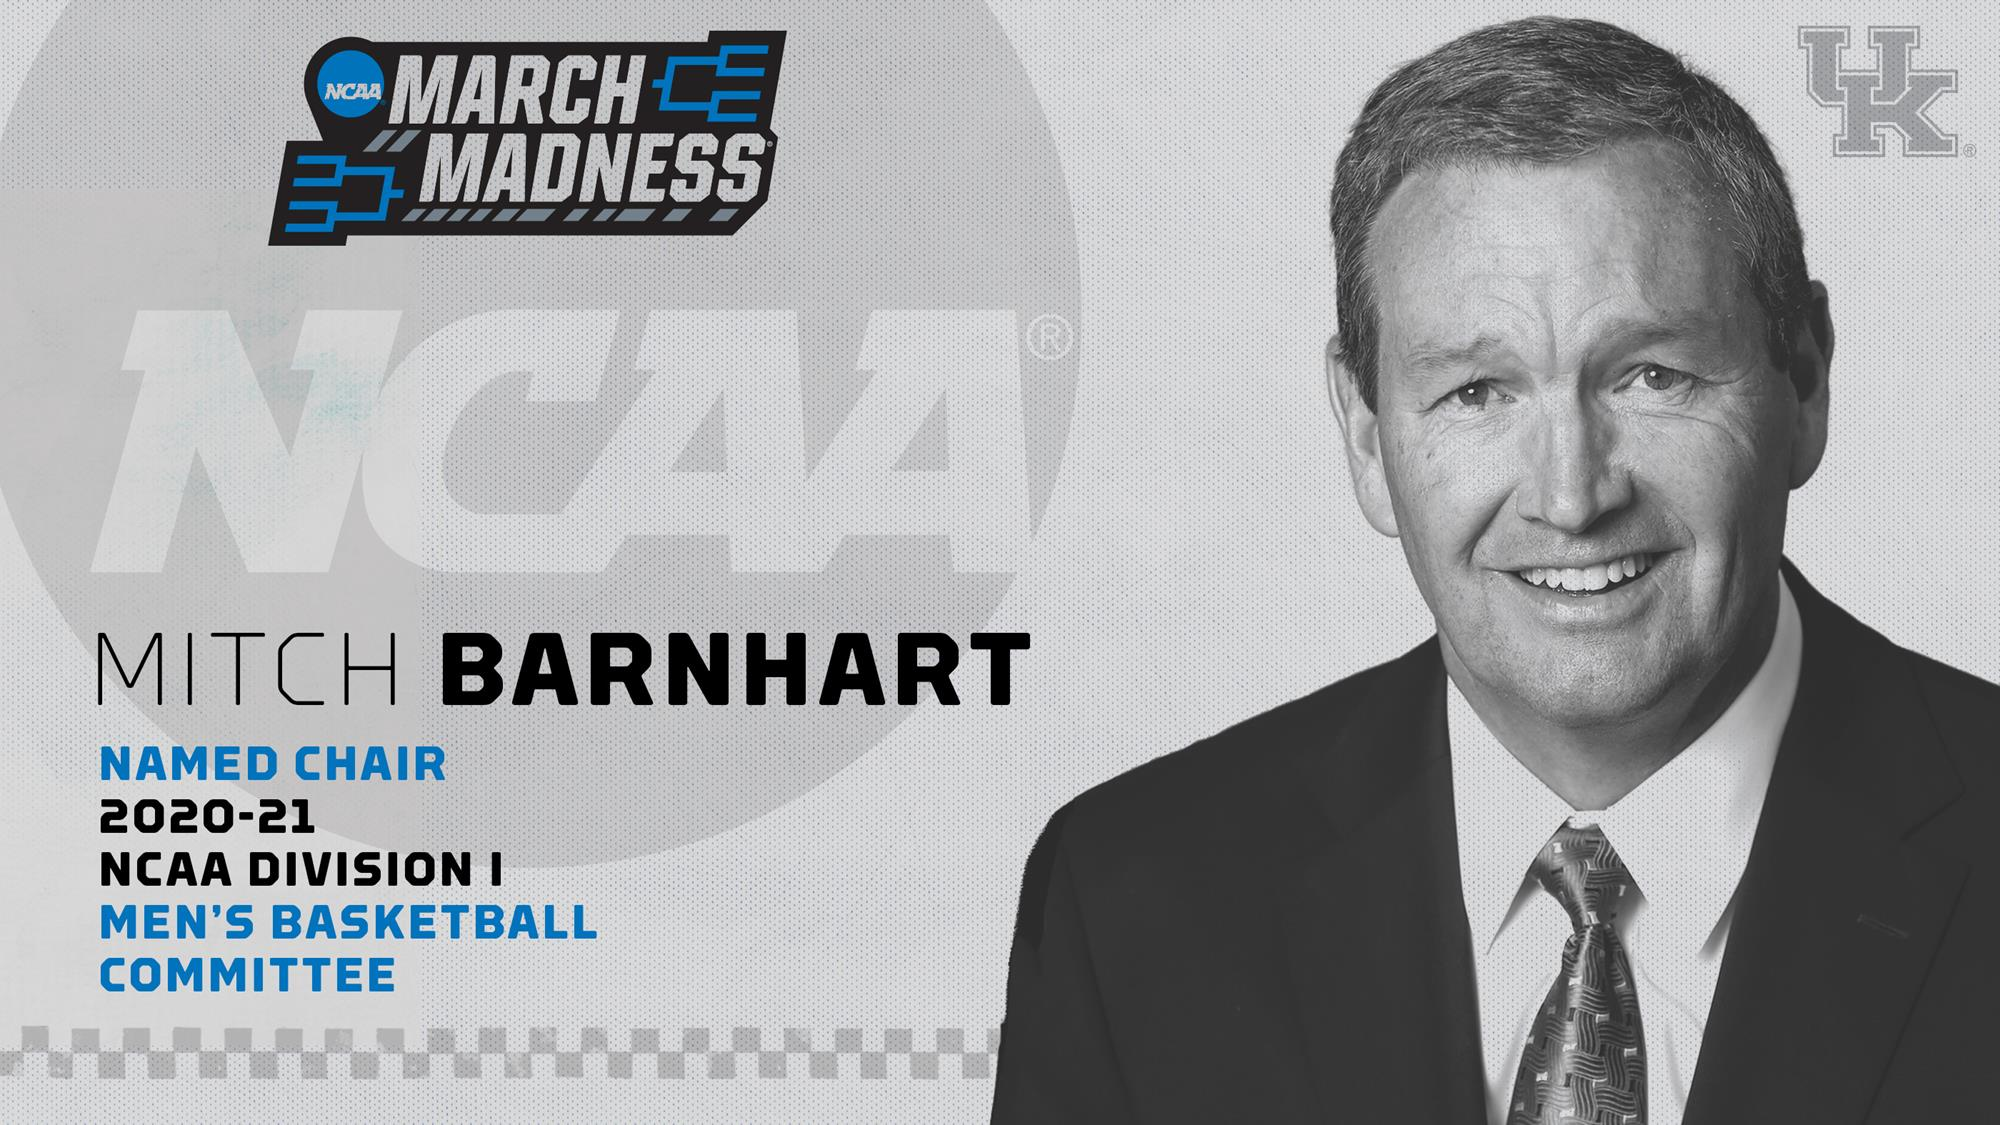 Barnhart Named Chair of NCAA DI MBB Committee for 2020-21